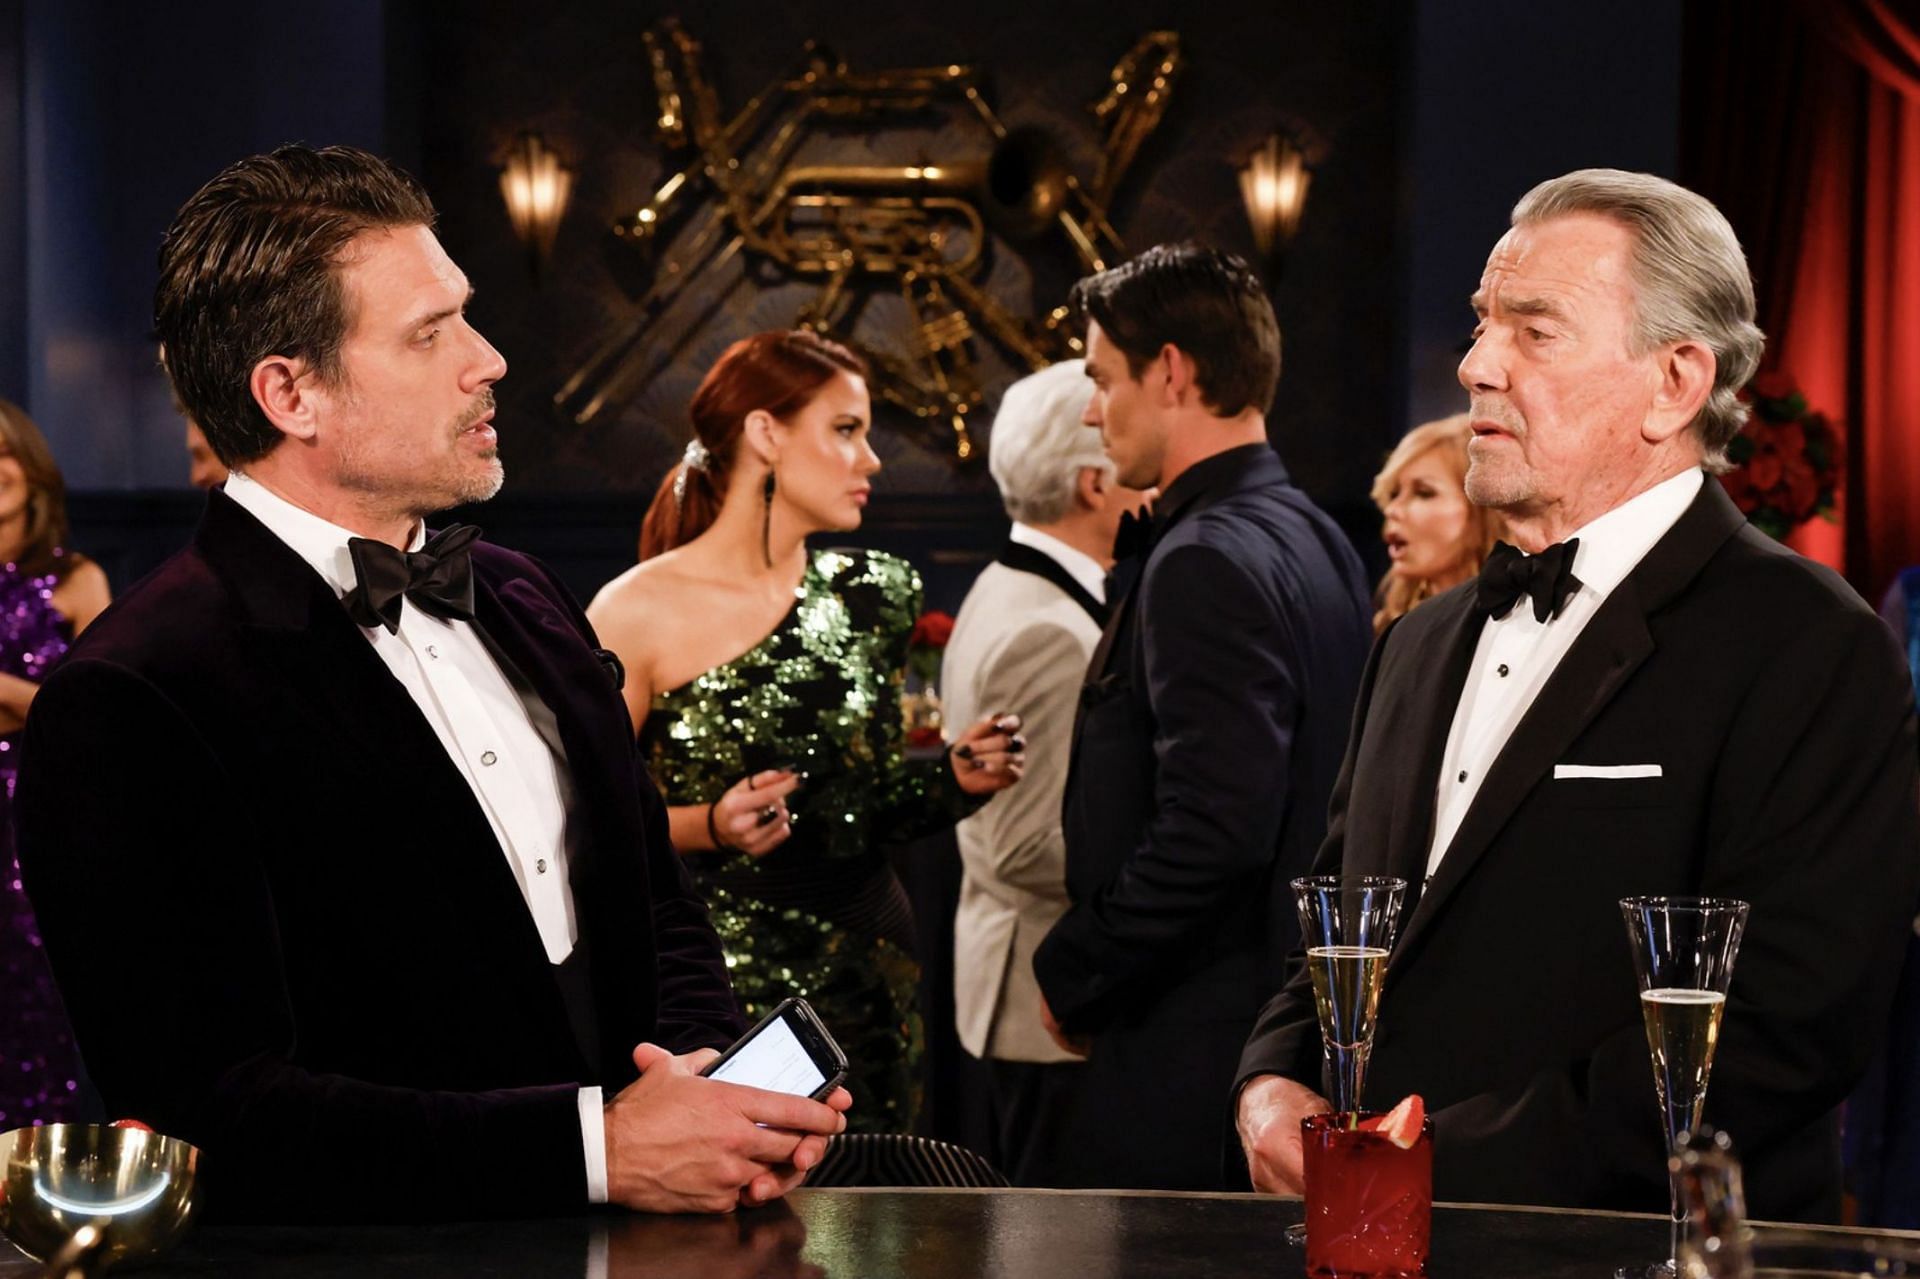 A still of Victor Newman from The Young and the Restless. (Image via Instagram/@youngandrestlesscbs)